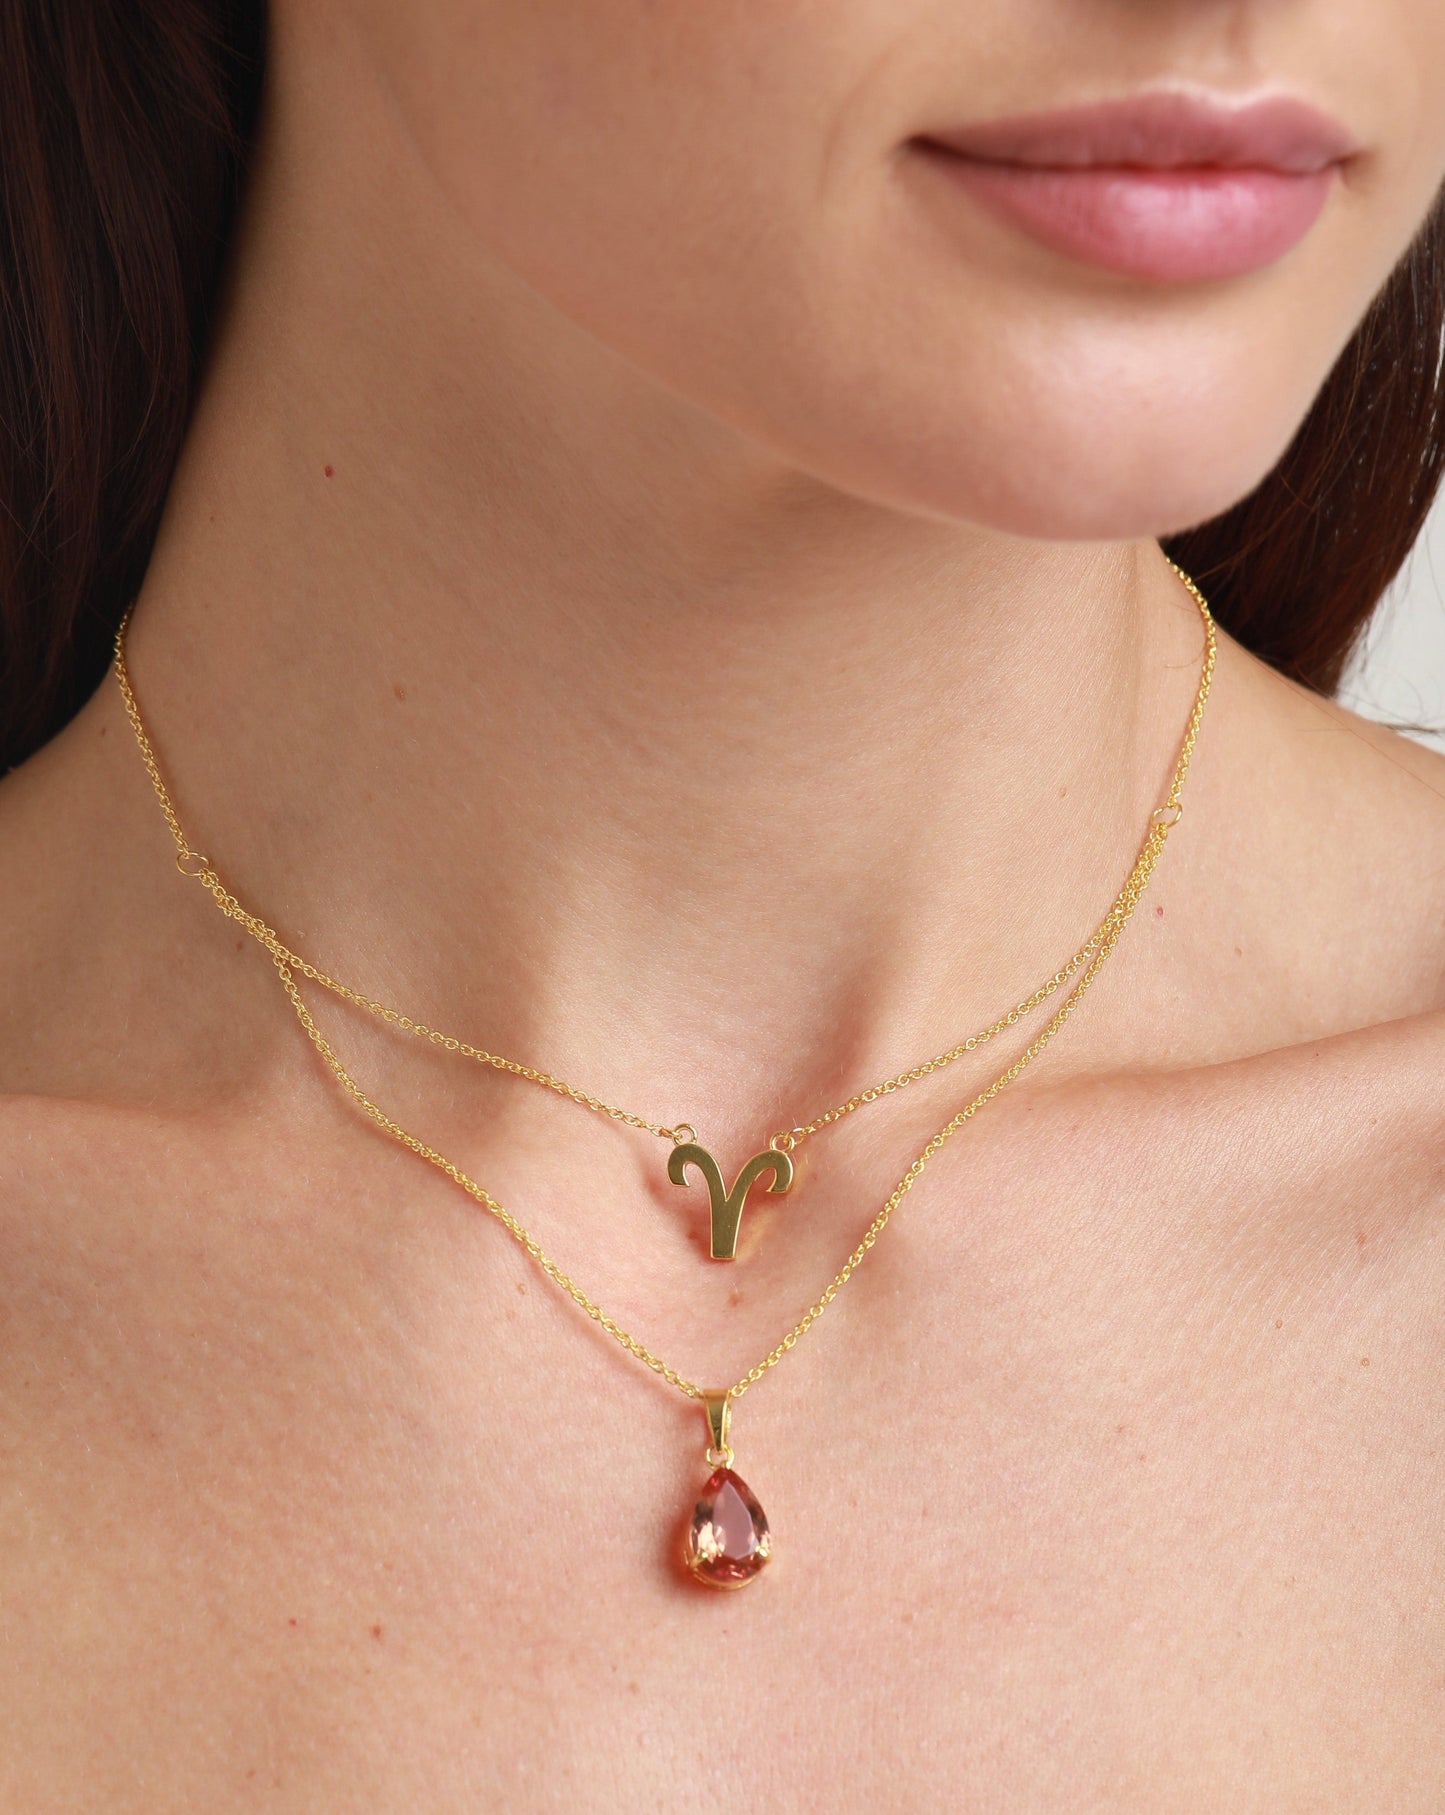 zodiac sign necklace- aries- gold